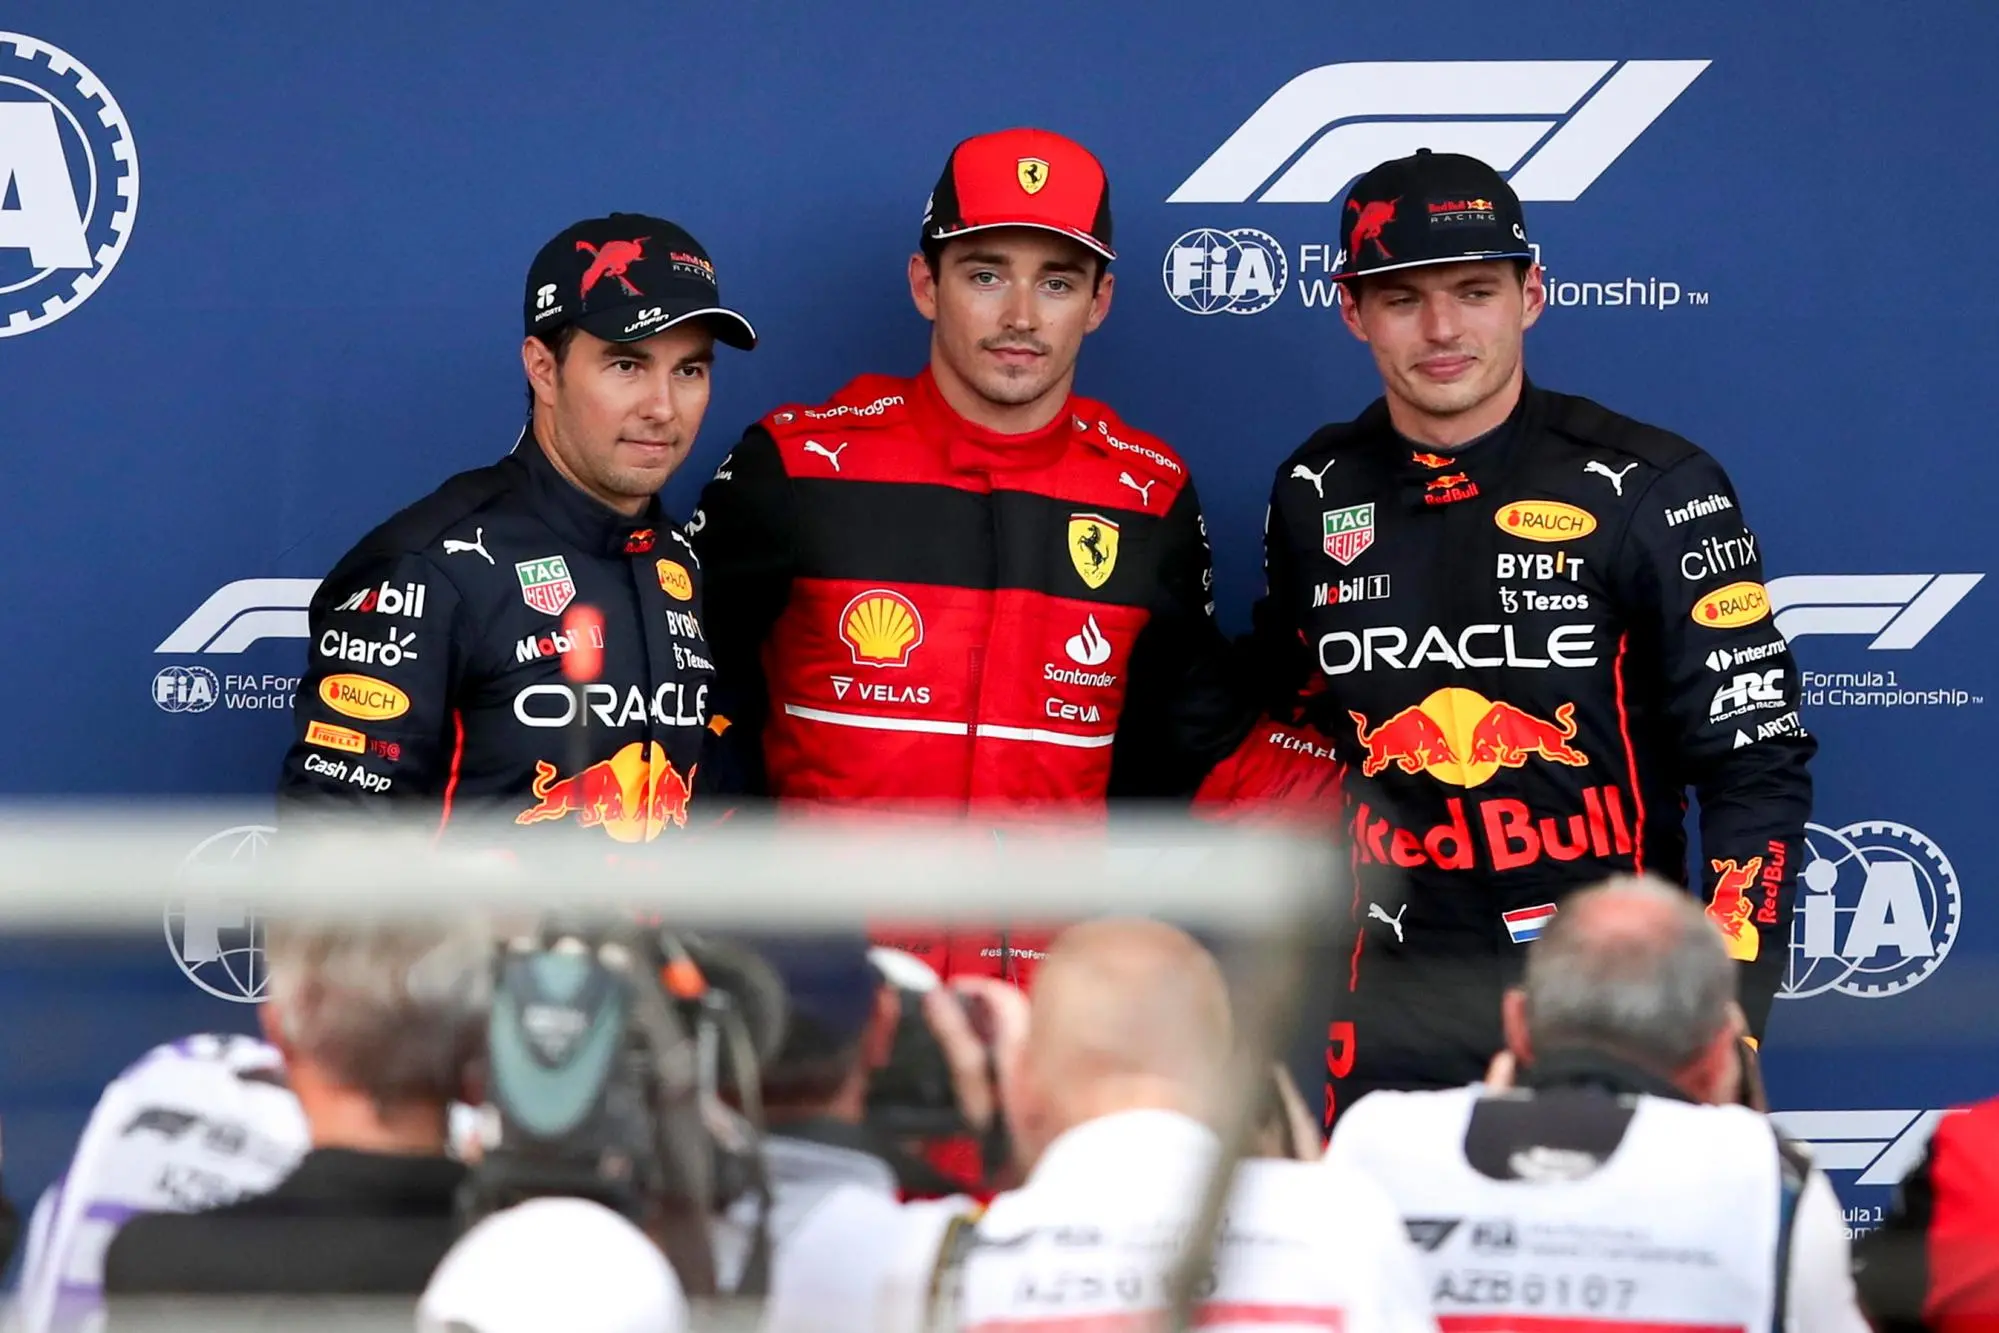 epa10008000 (L-R) Mexican Formula One driver Sergio Perez of Red Bull Racing, Monaco's Formula One driver Charles Leclerc of Scuderia Ferrari, and Dutch Formula One driver Max Verstappen of Red Bull Racing pose on the parc ferme at the end of qualifying of the Formula One Grand Prix of Azerbaijan at the Baku City Circuit in Baku, Azerbaijan, 11 June 2022. The Formula One Grand Prix of Azerbaijan will take place on 12 June 2022. EPA/ALI HAIDER